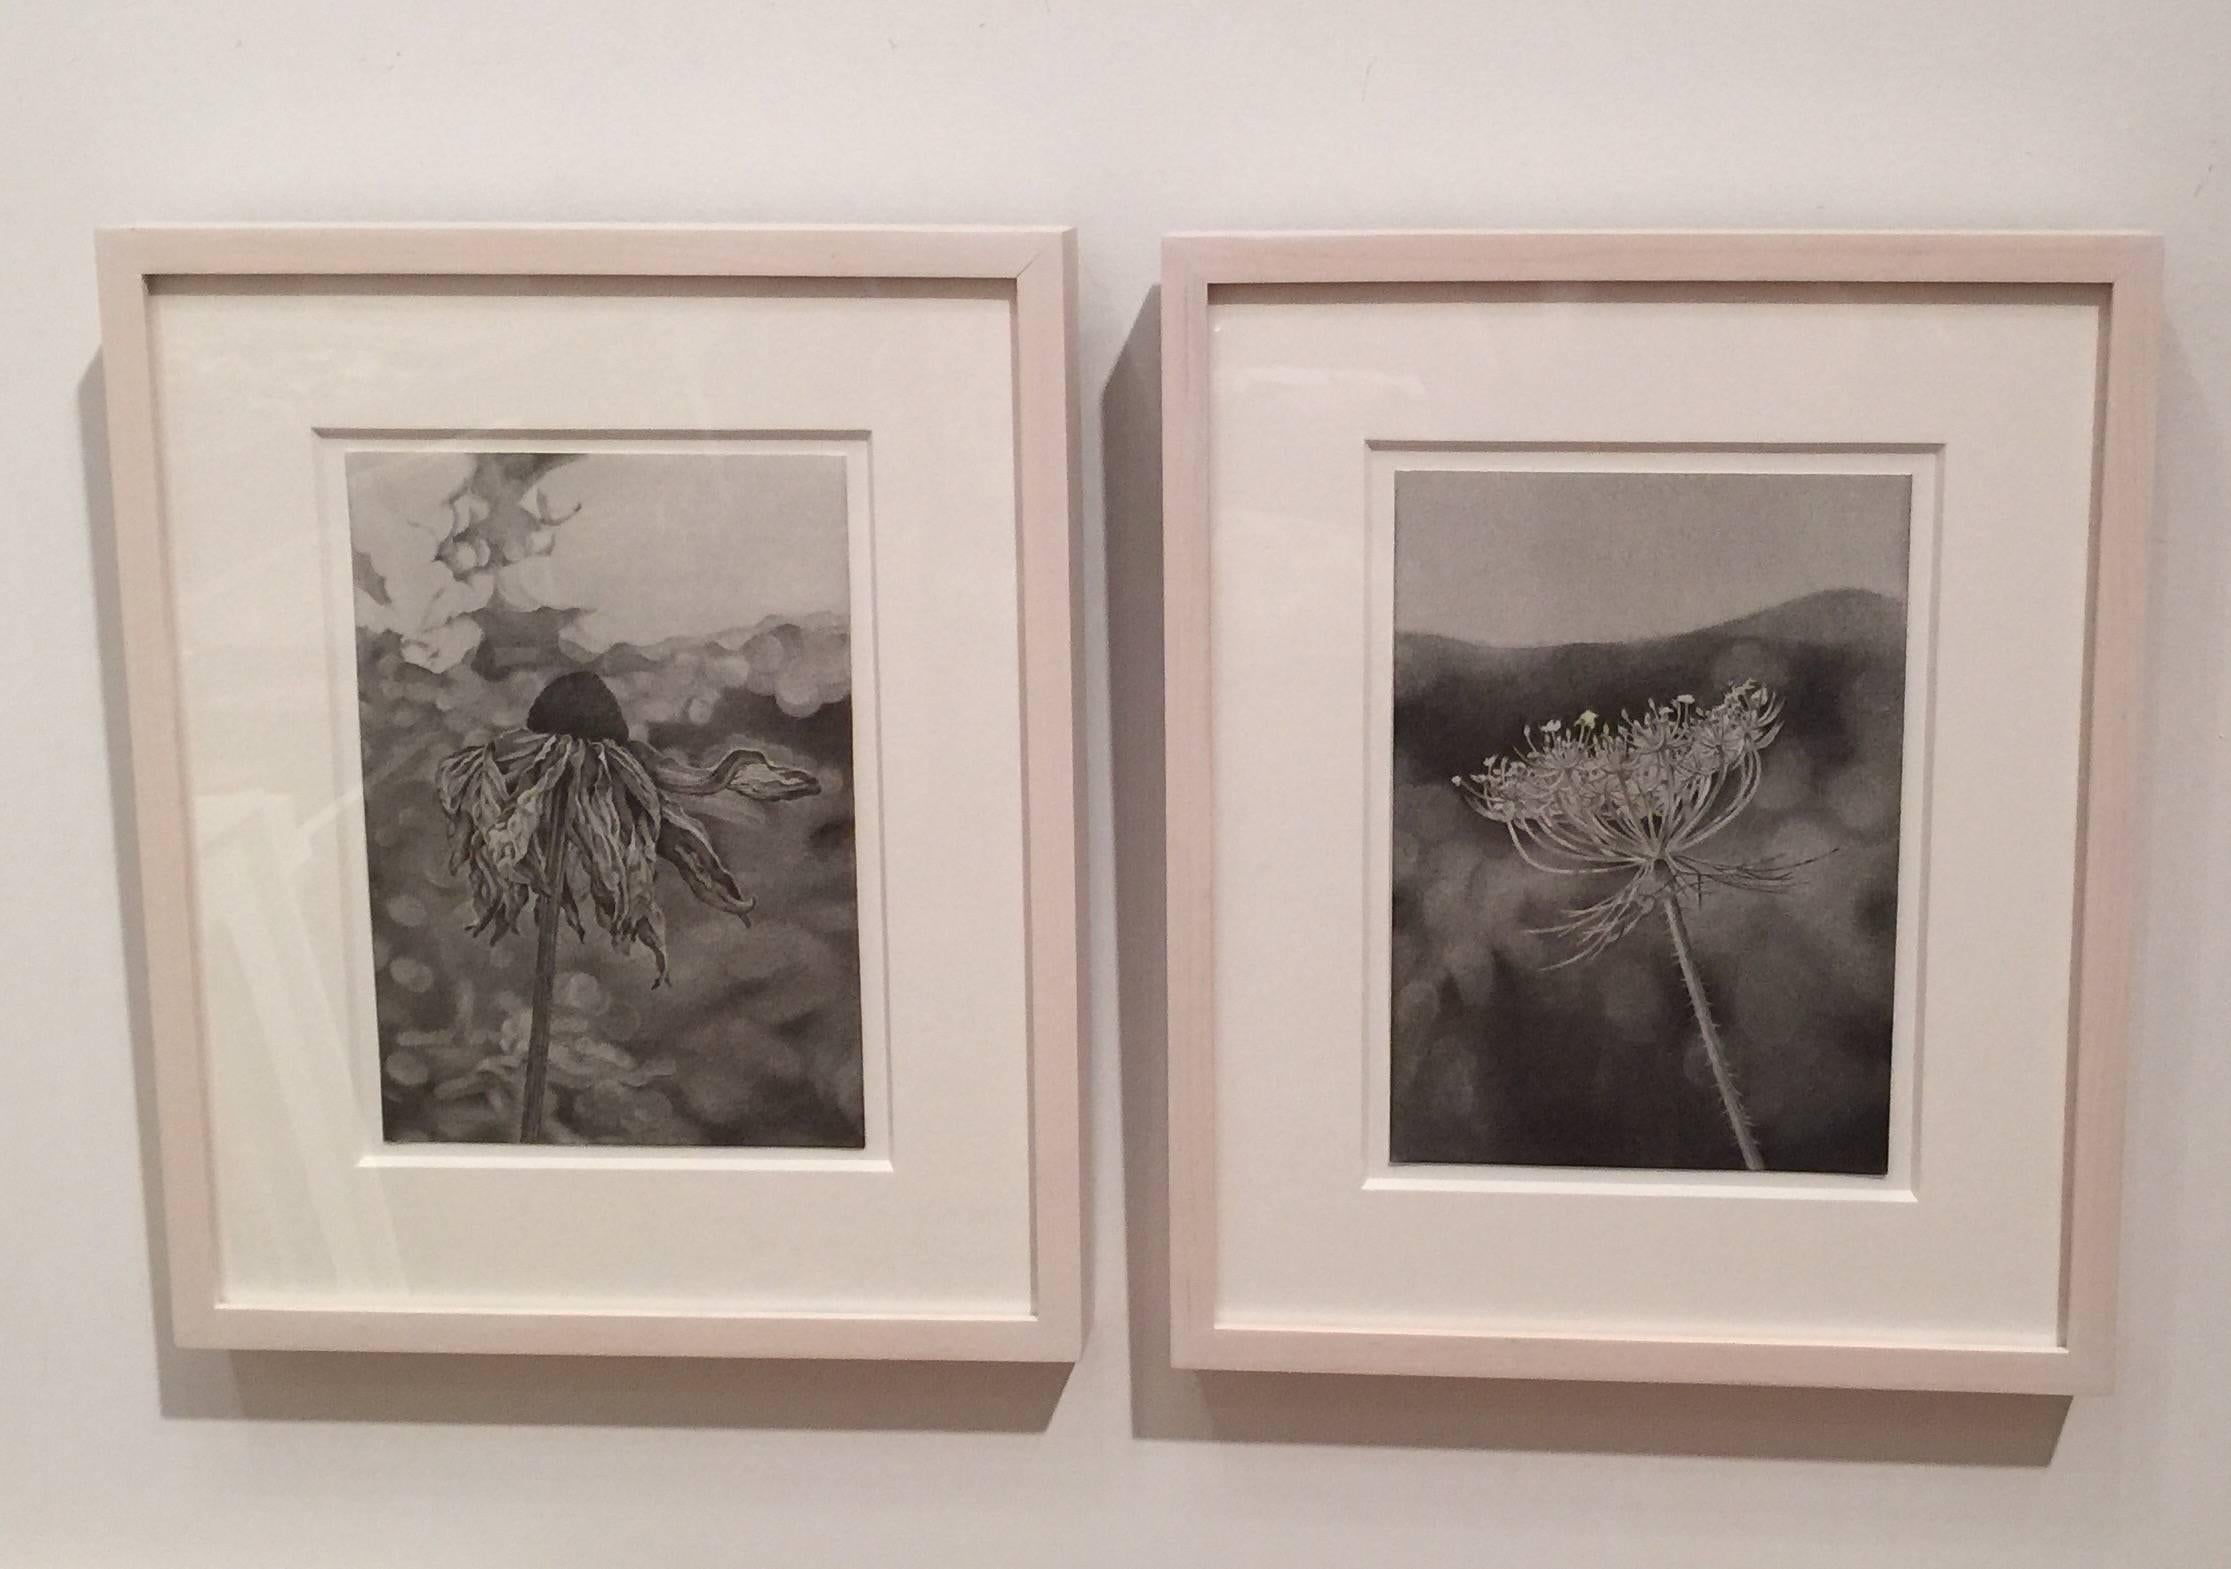 Field of Flowers 2, photorealist graphite floral drawing, 2016 - Art by Mary Reilly